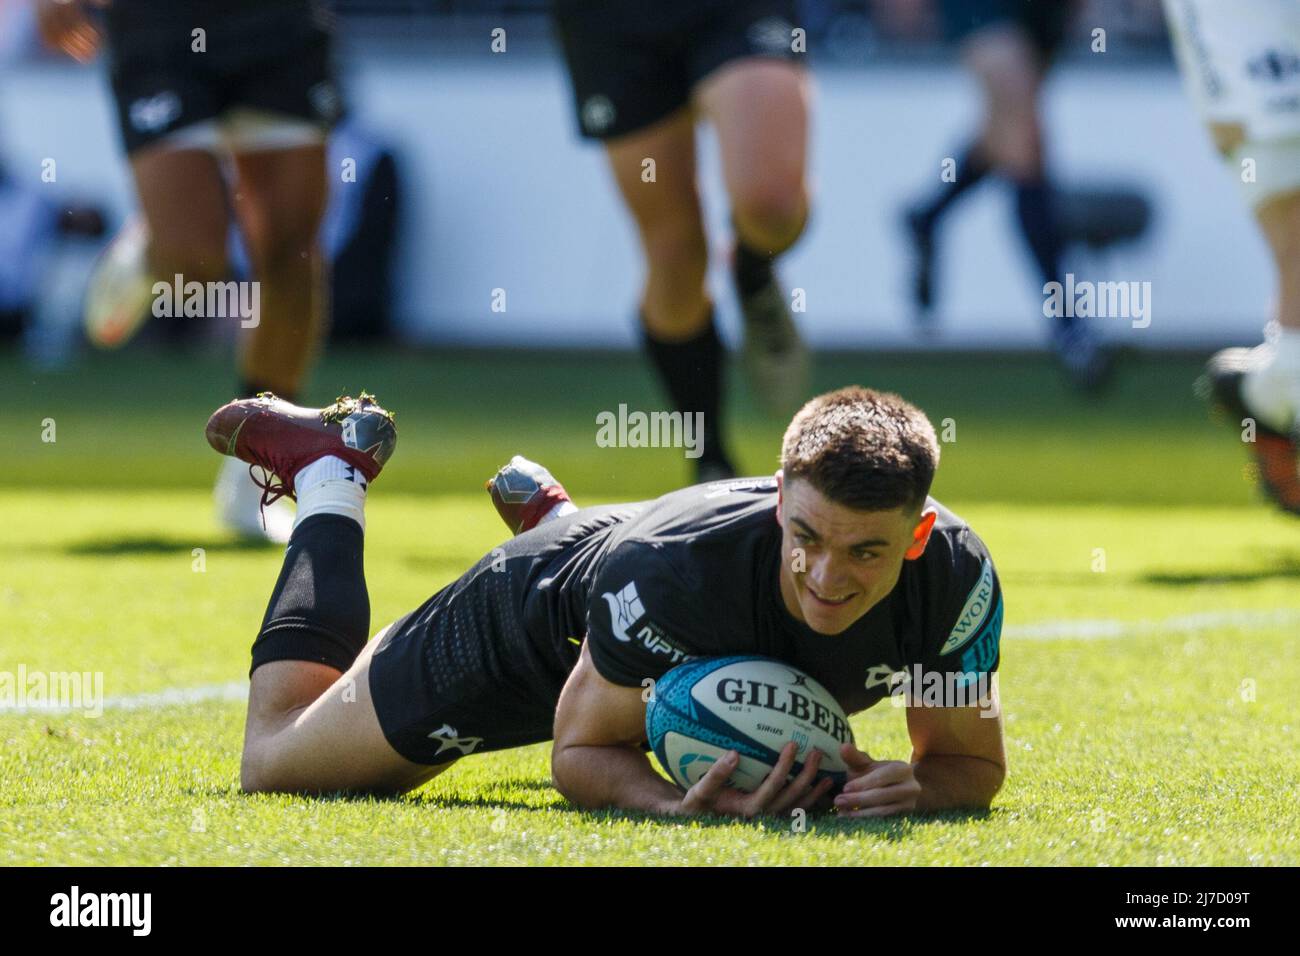 Swansea, UK. 8 May, 2022. Reuben Morgan-Williams of Ospreys scores a try during the Ospreys v Dragons United Rugby Championship Match. Credit: Gruffydd ThomasAlamy Stock Photo